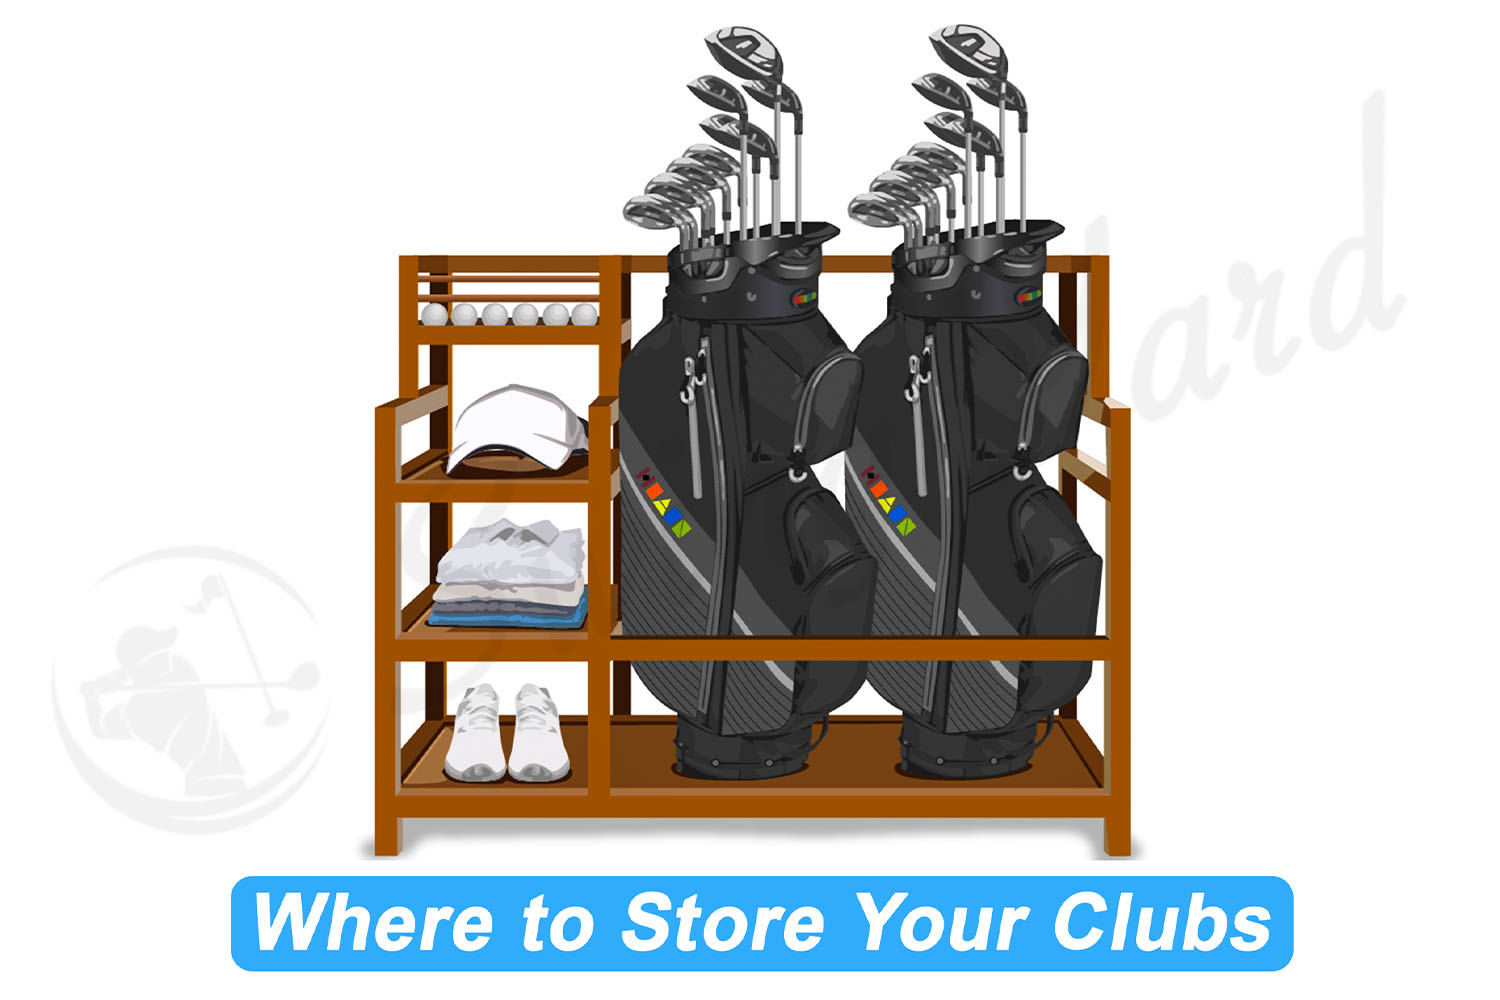 Where to store your clubs